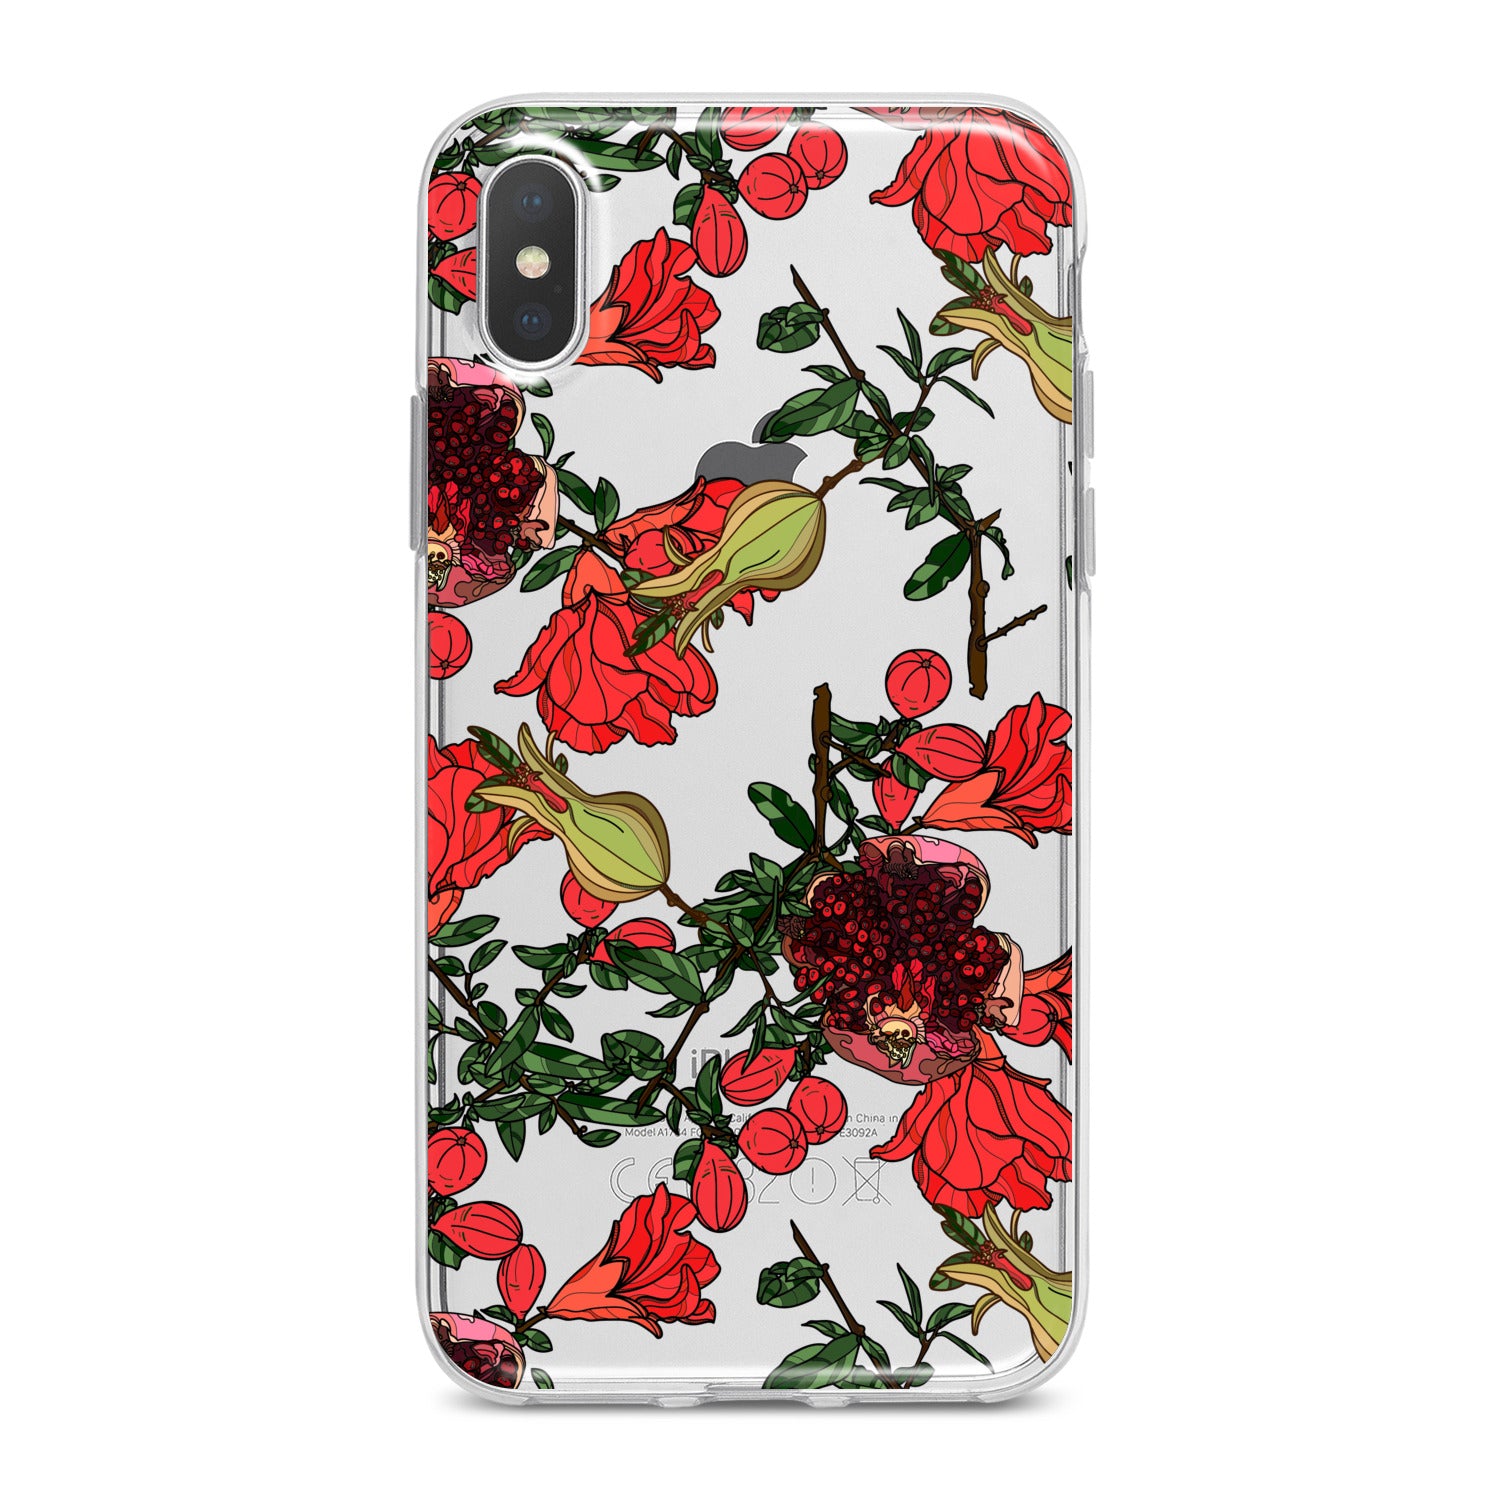 Lex Altern Red Garnet Blossom Phone Case for your iPhone & Android phone.